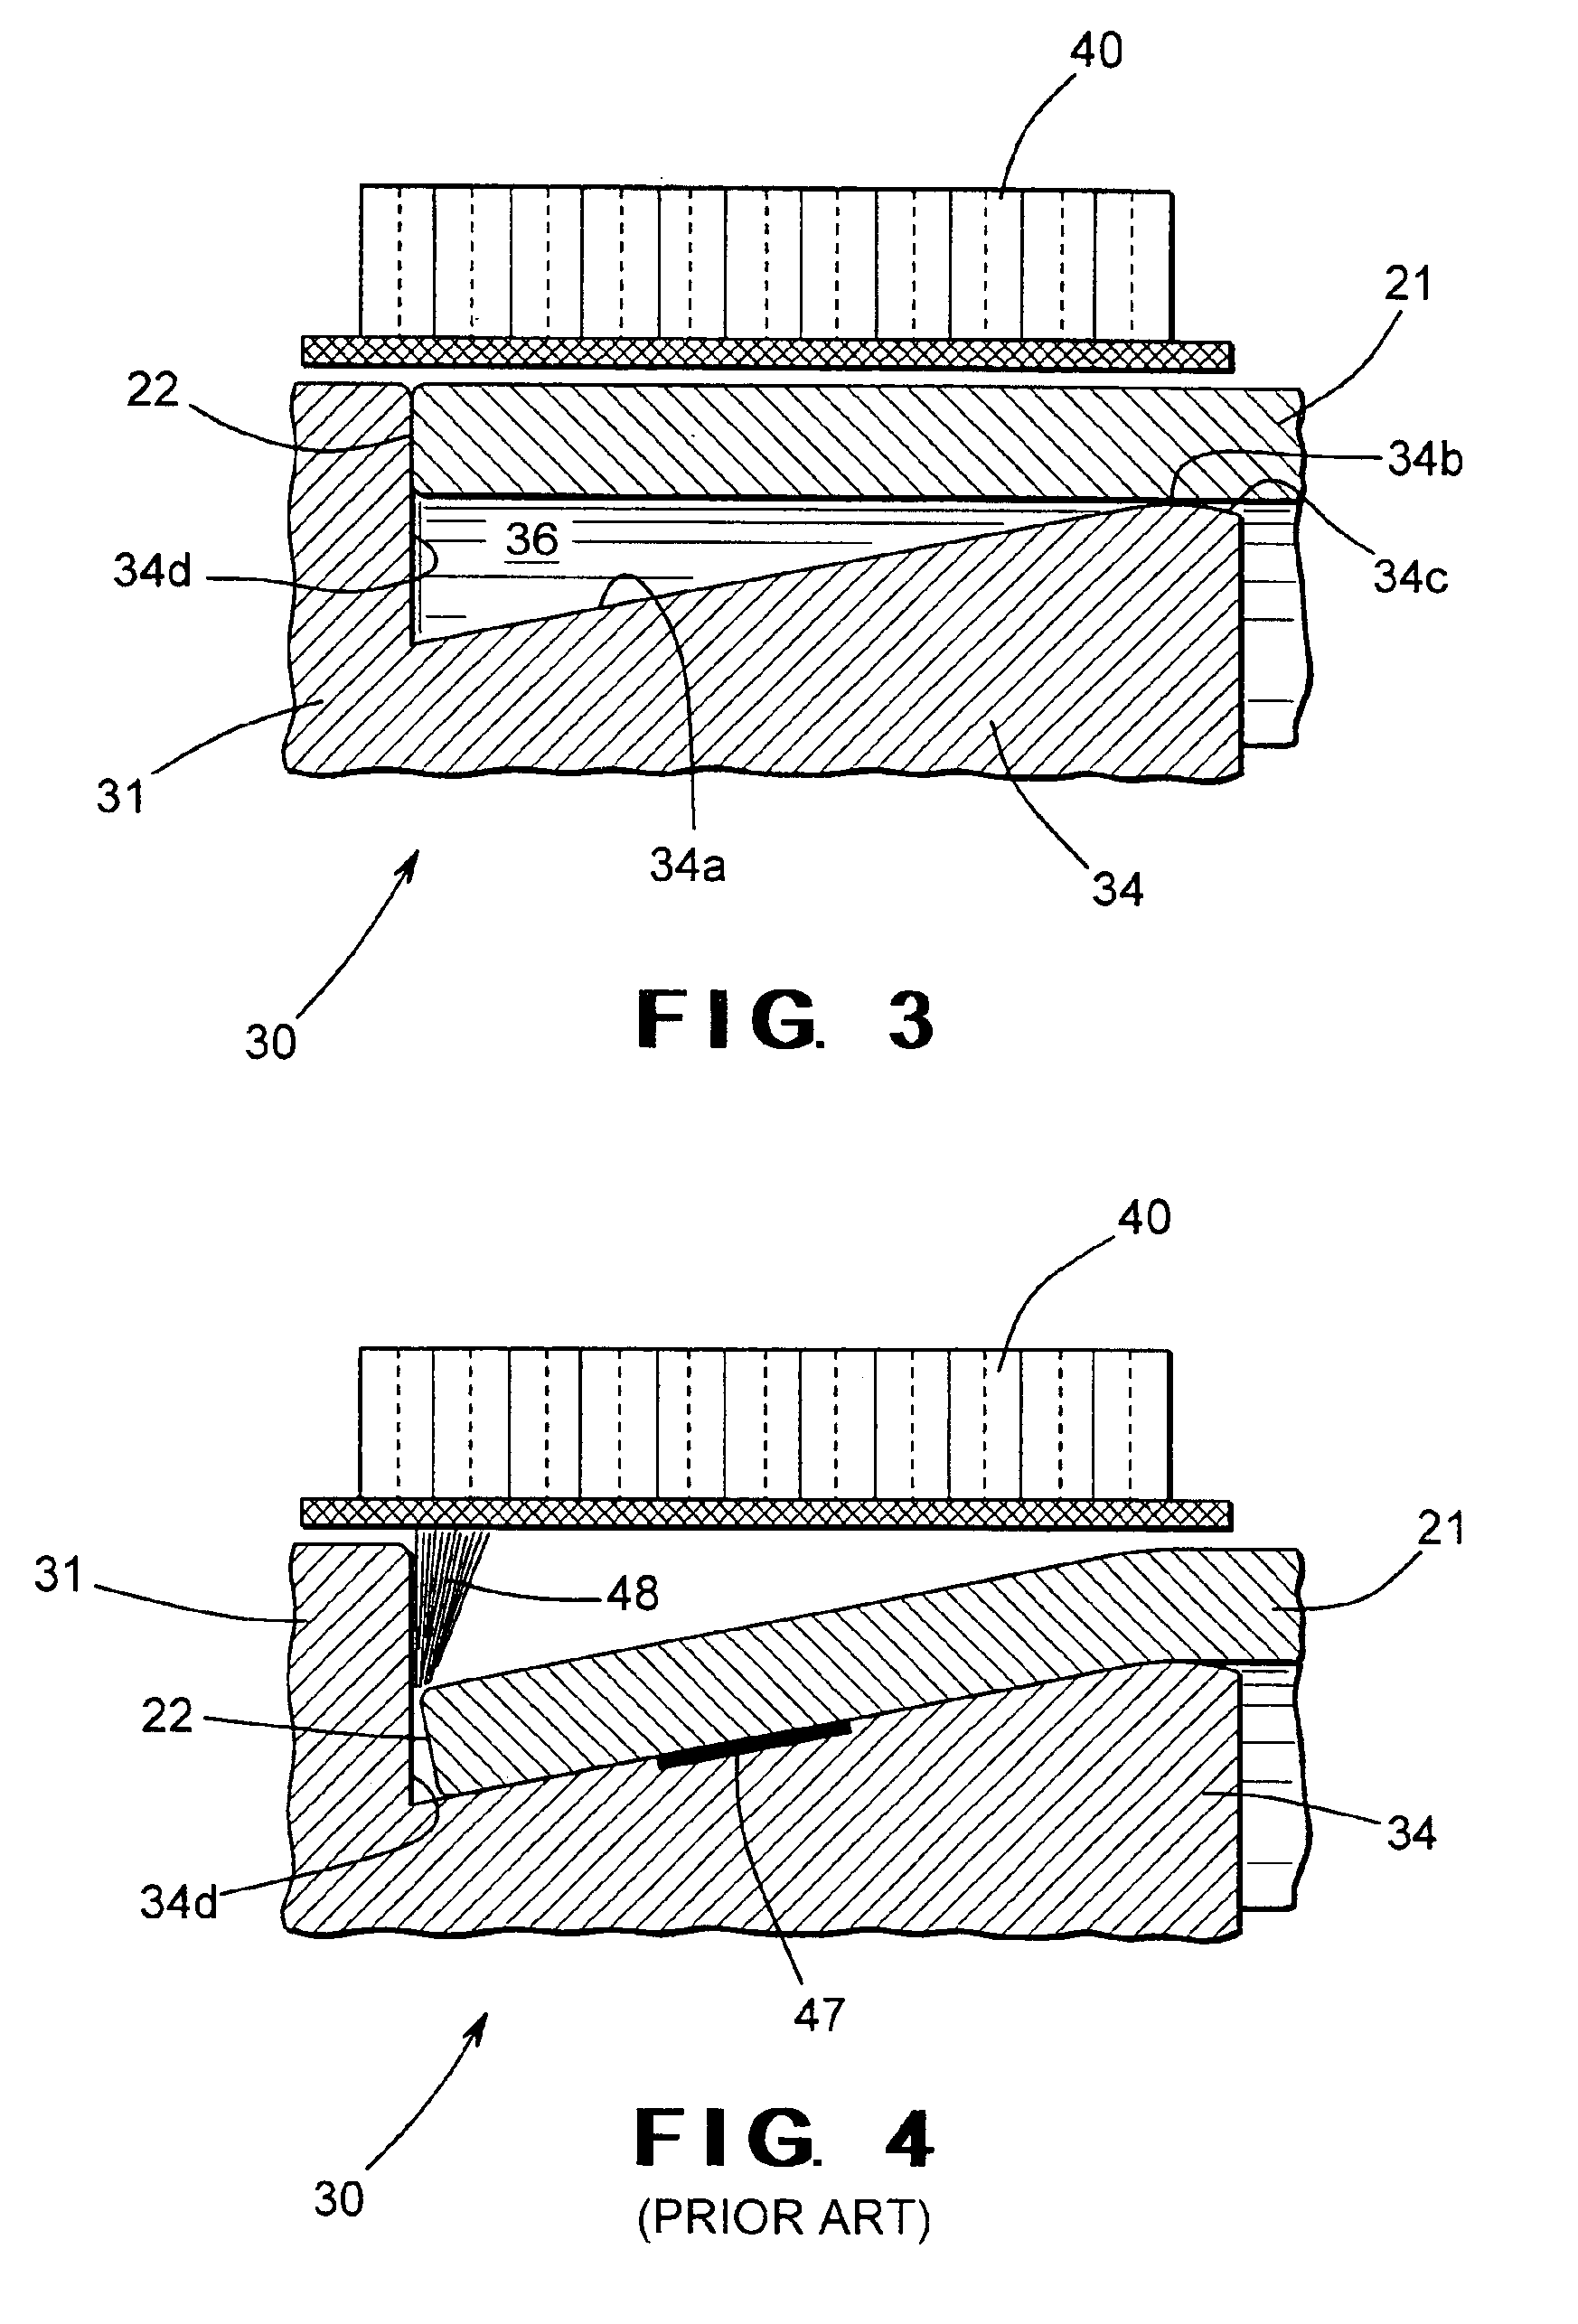 Method for securing a yoke to a tube using magnetic pulse welding techniques